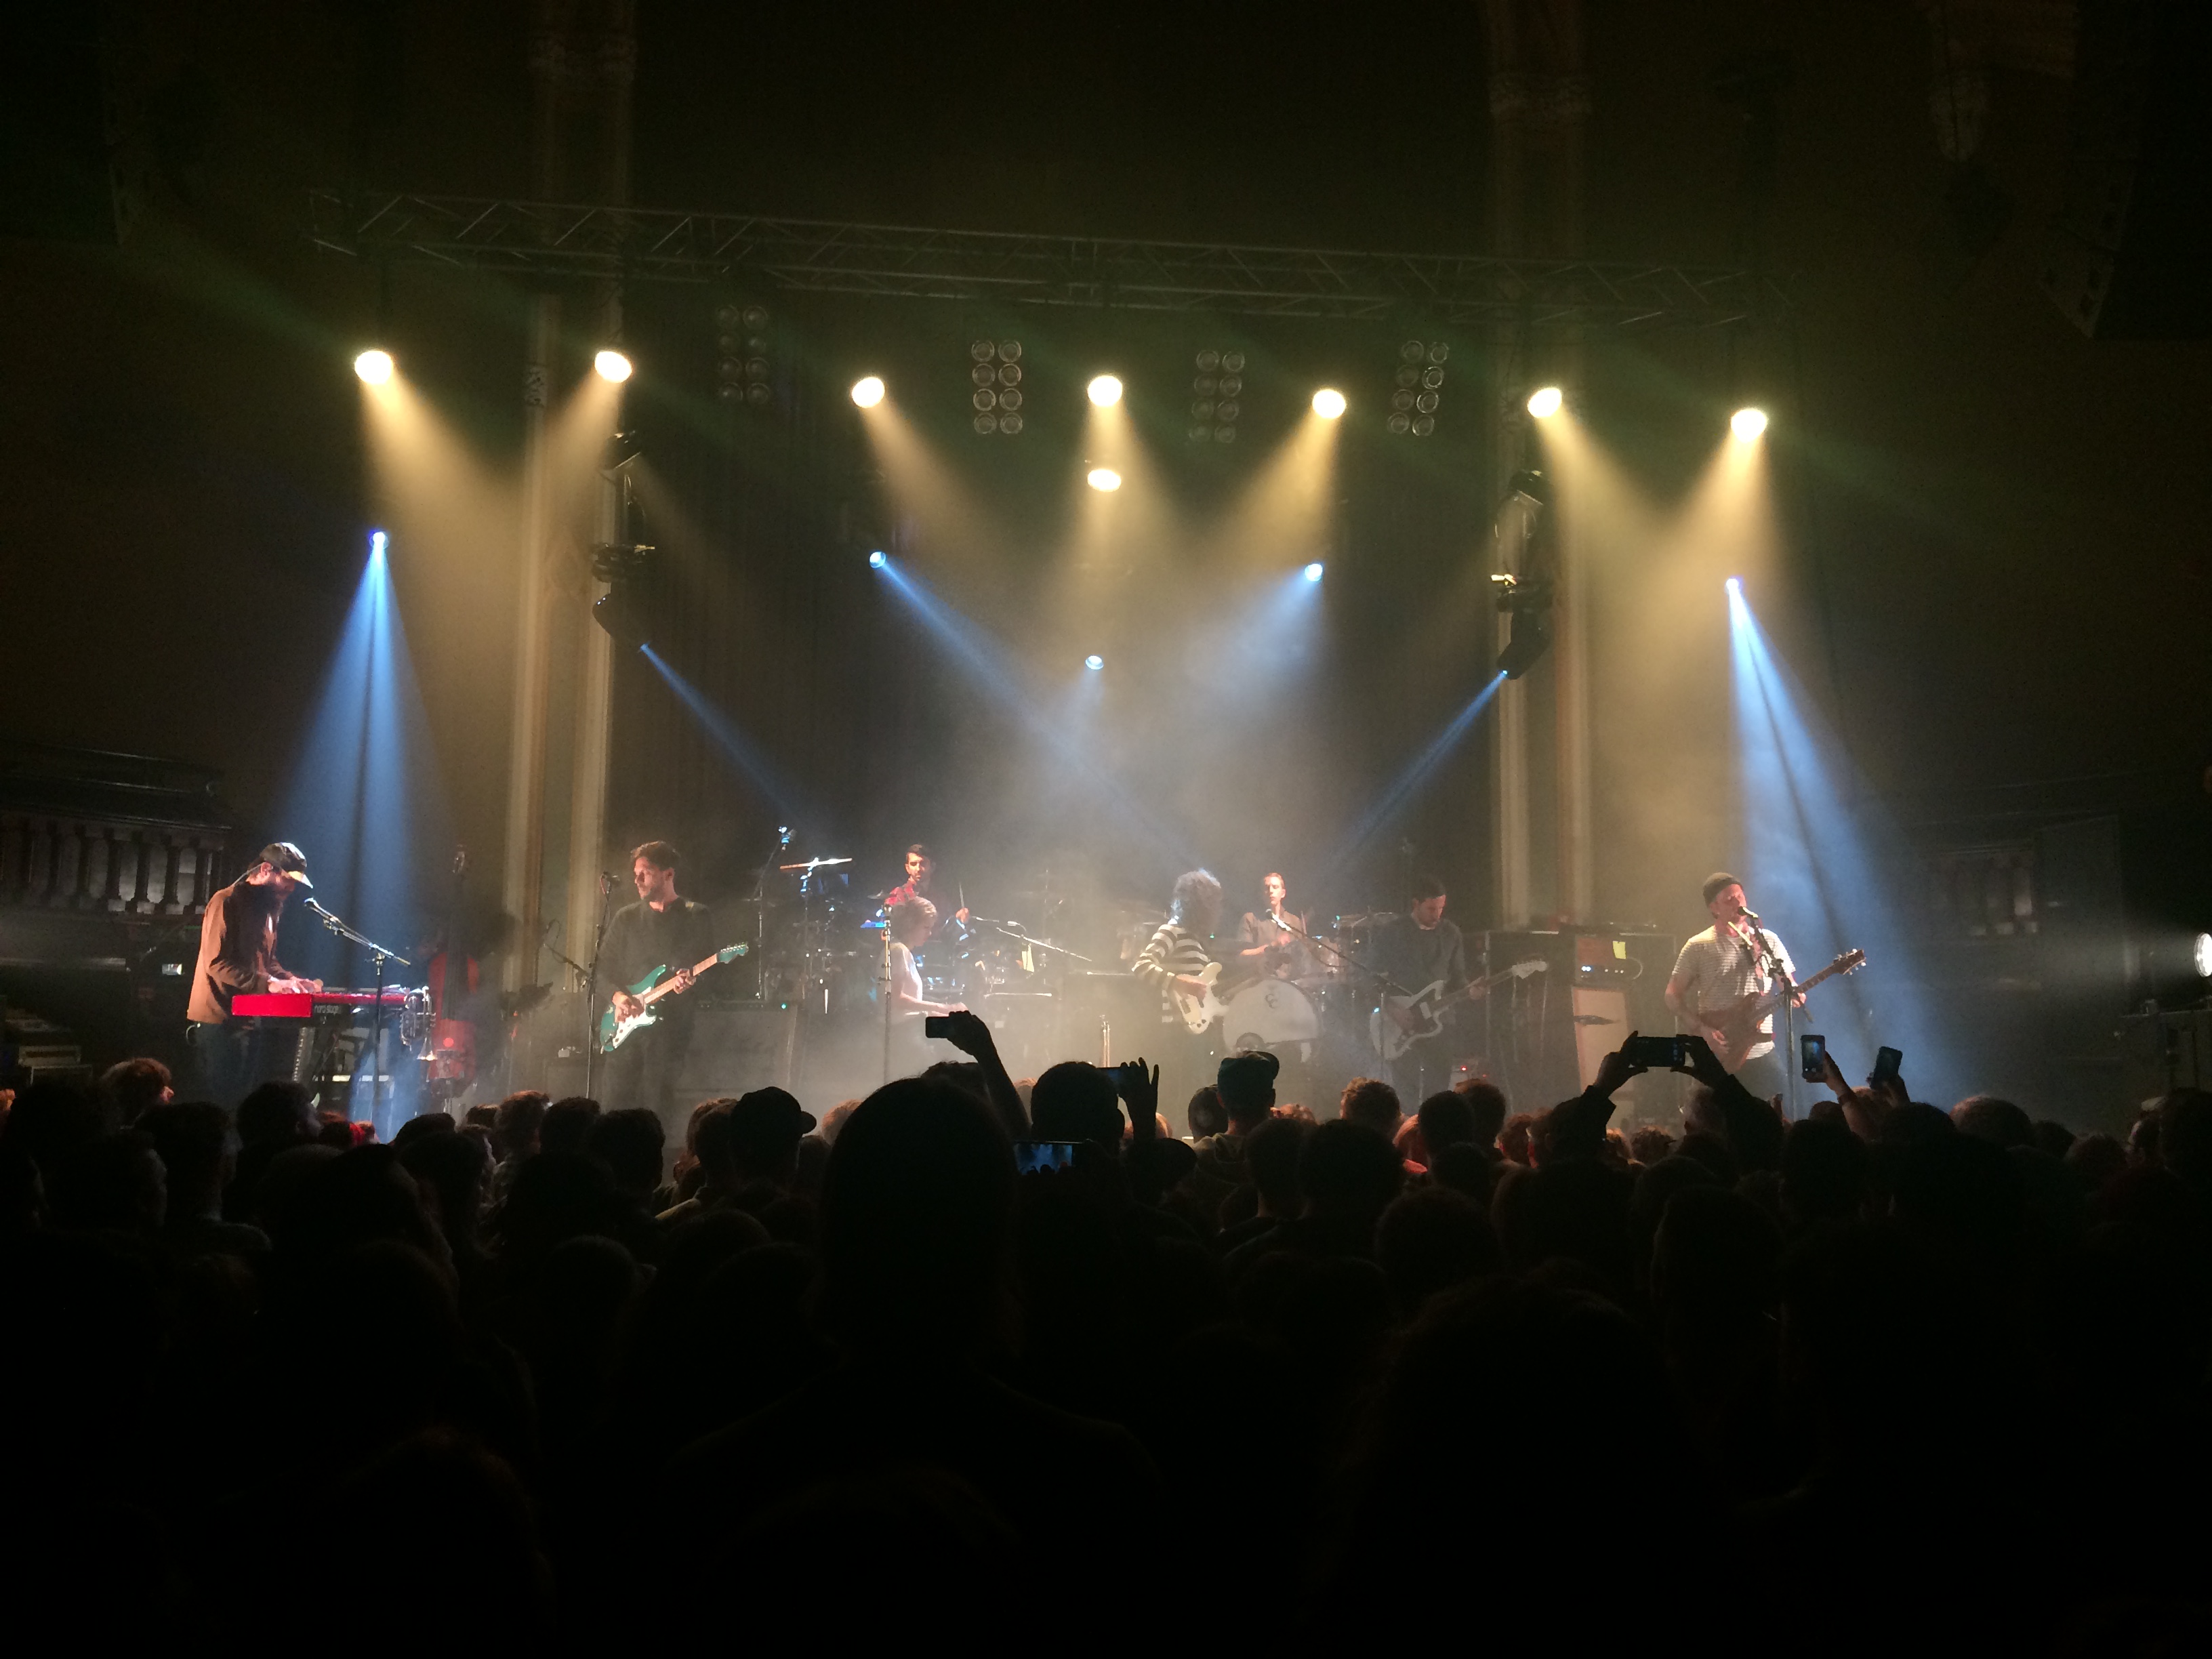 Modest Mouse at Asbury Hall (4/17/15)